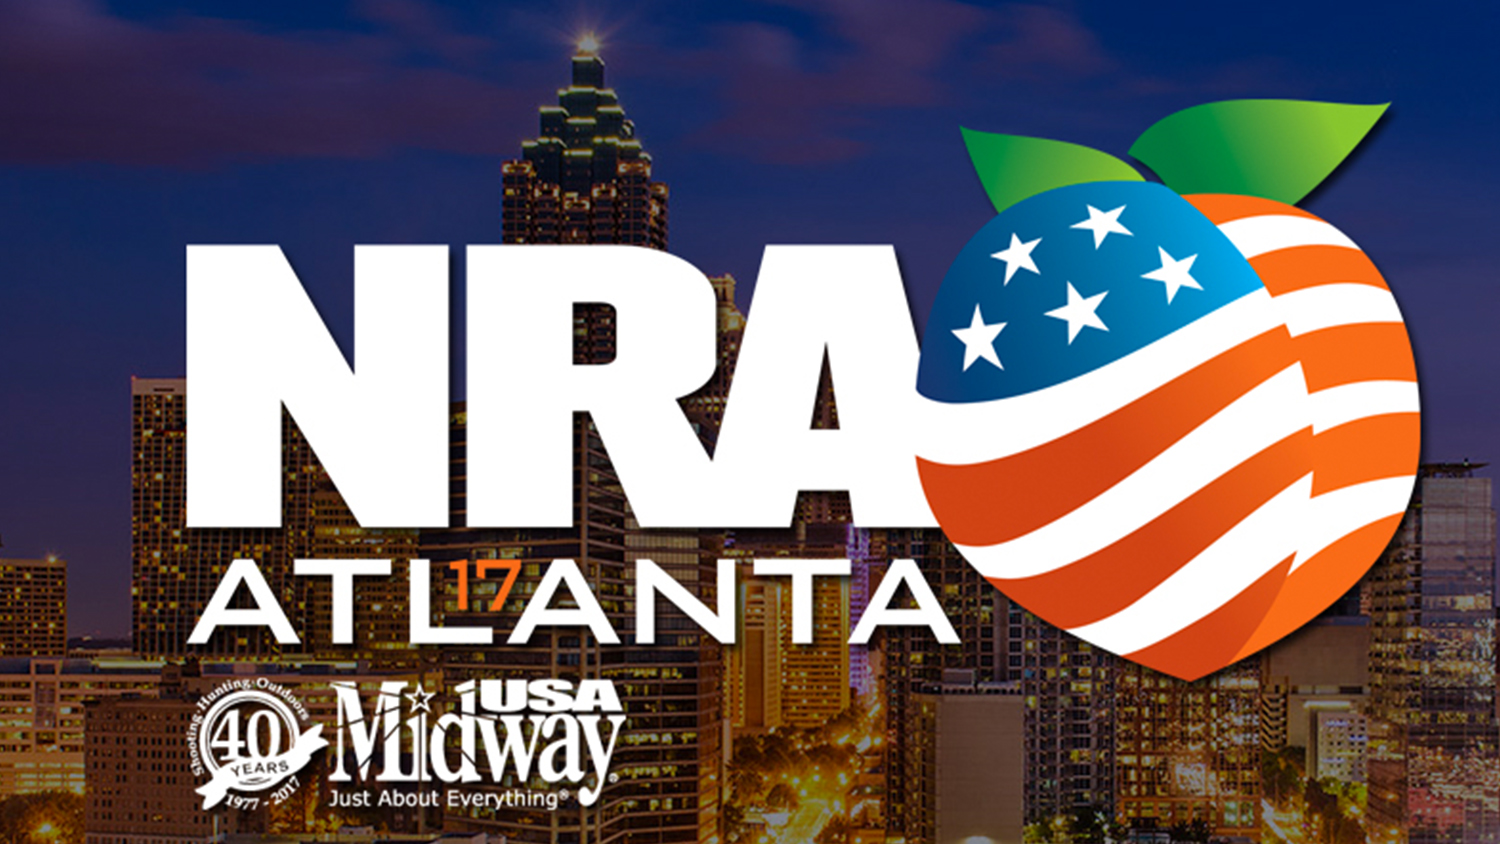 Get your tickets for the The 146th NRA Annual Meetings and Exhibits in Atlanta, Georgia